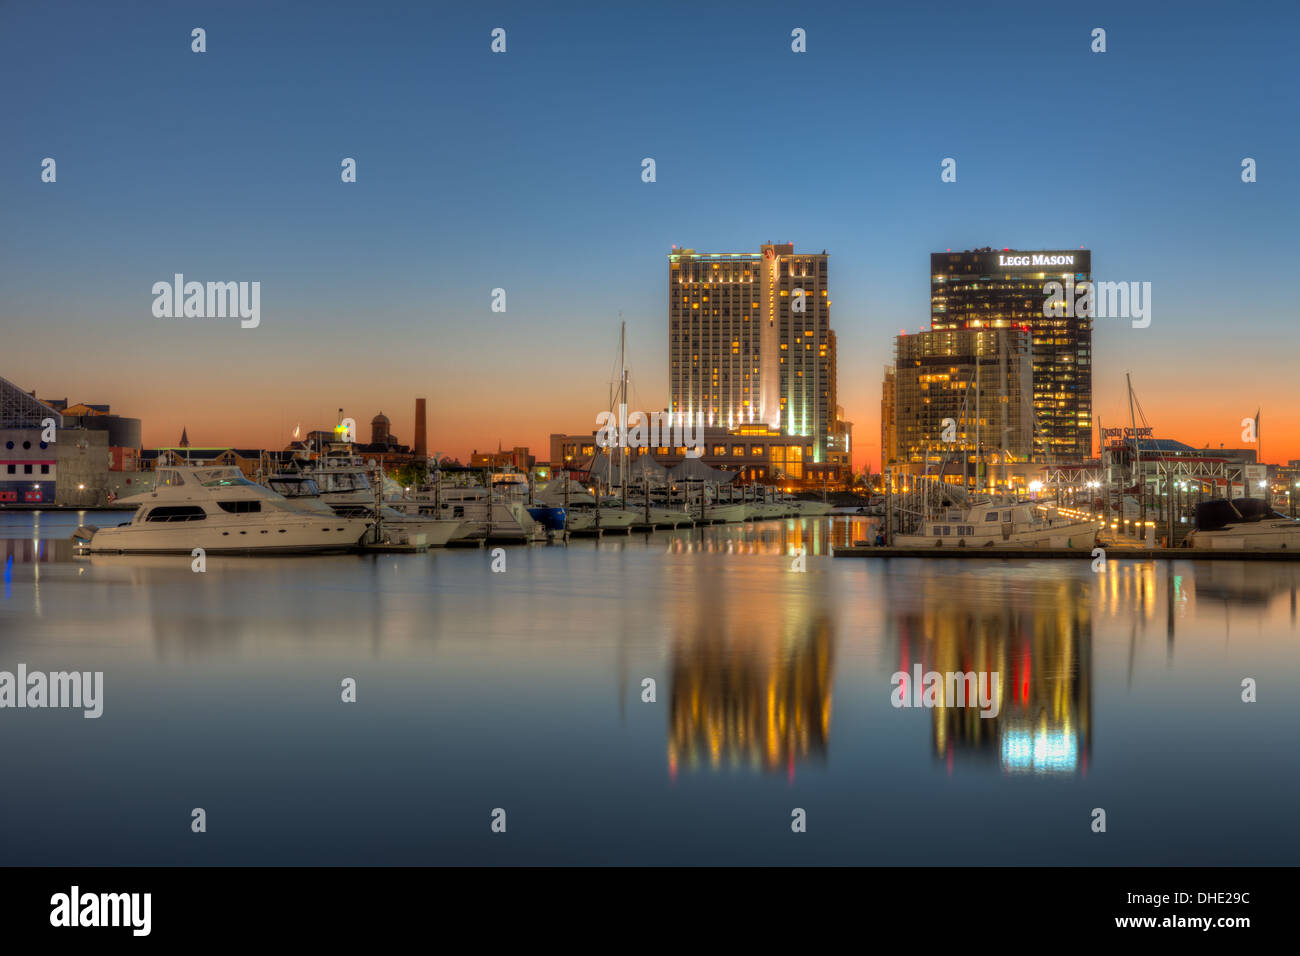 The Baltimore Harbor East development including the Baltimore Marriott Waterfront Hotel and the Legg Mason Building at dawn. Stock Photo